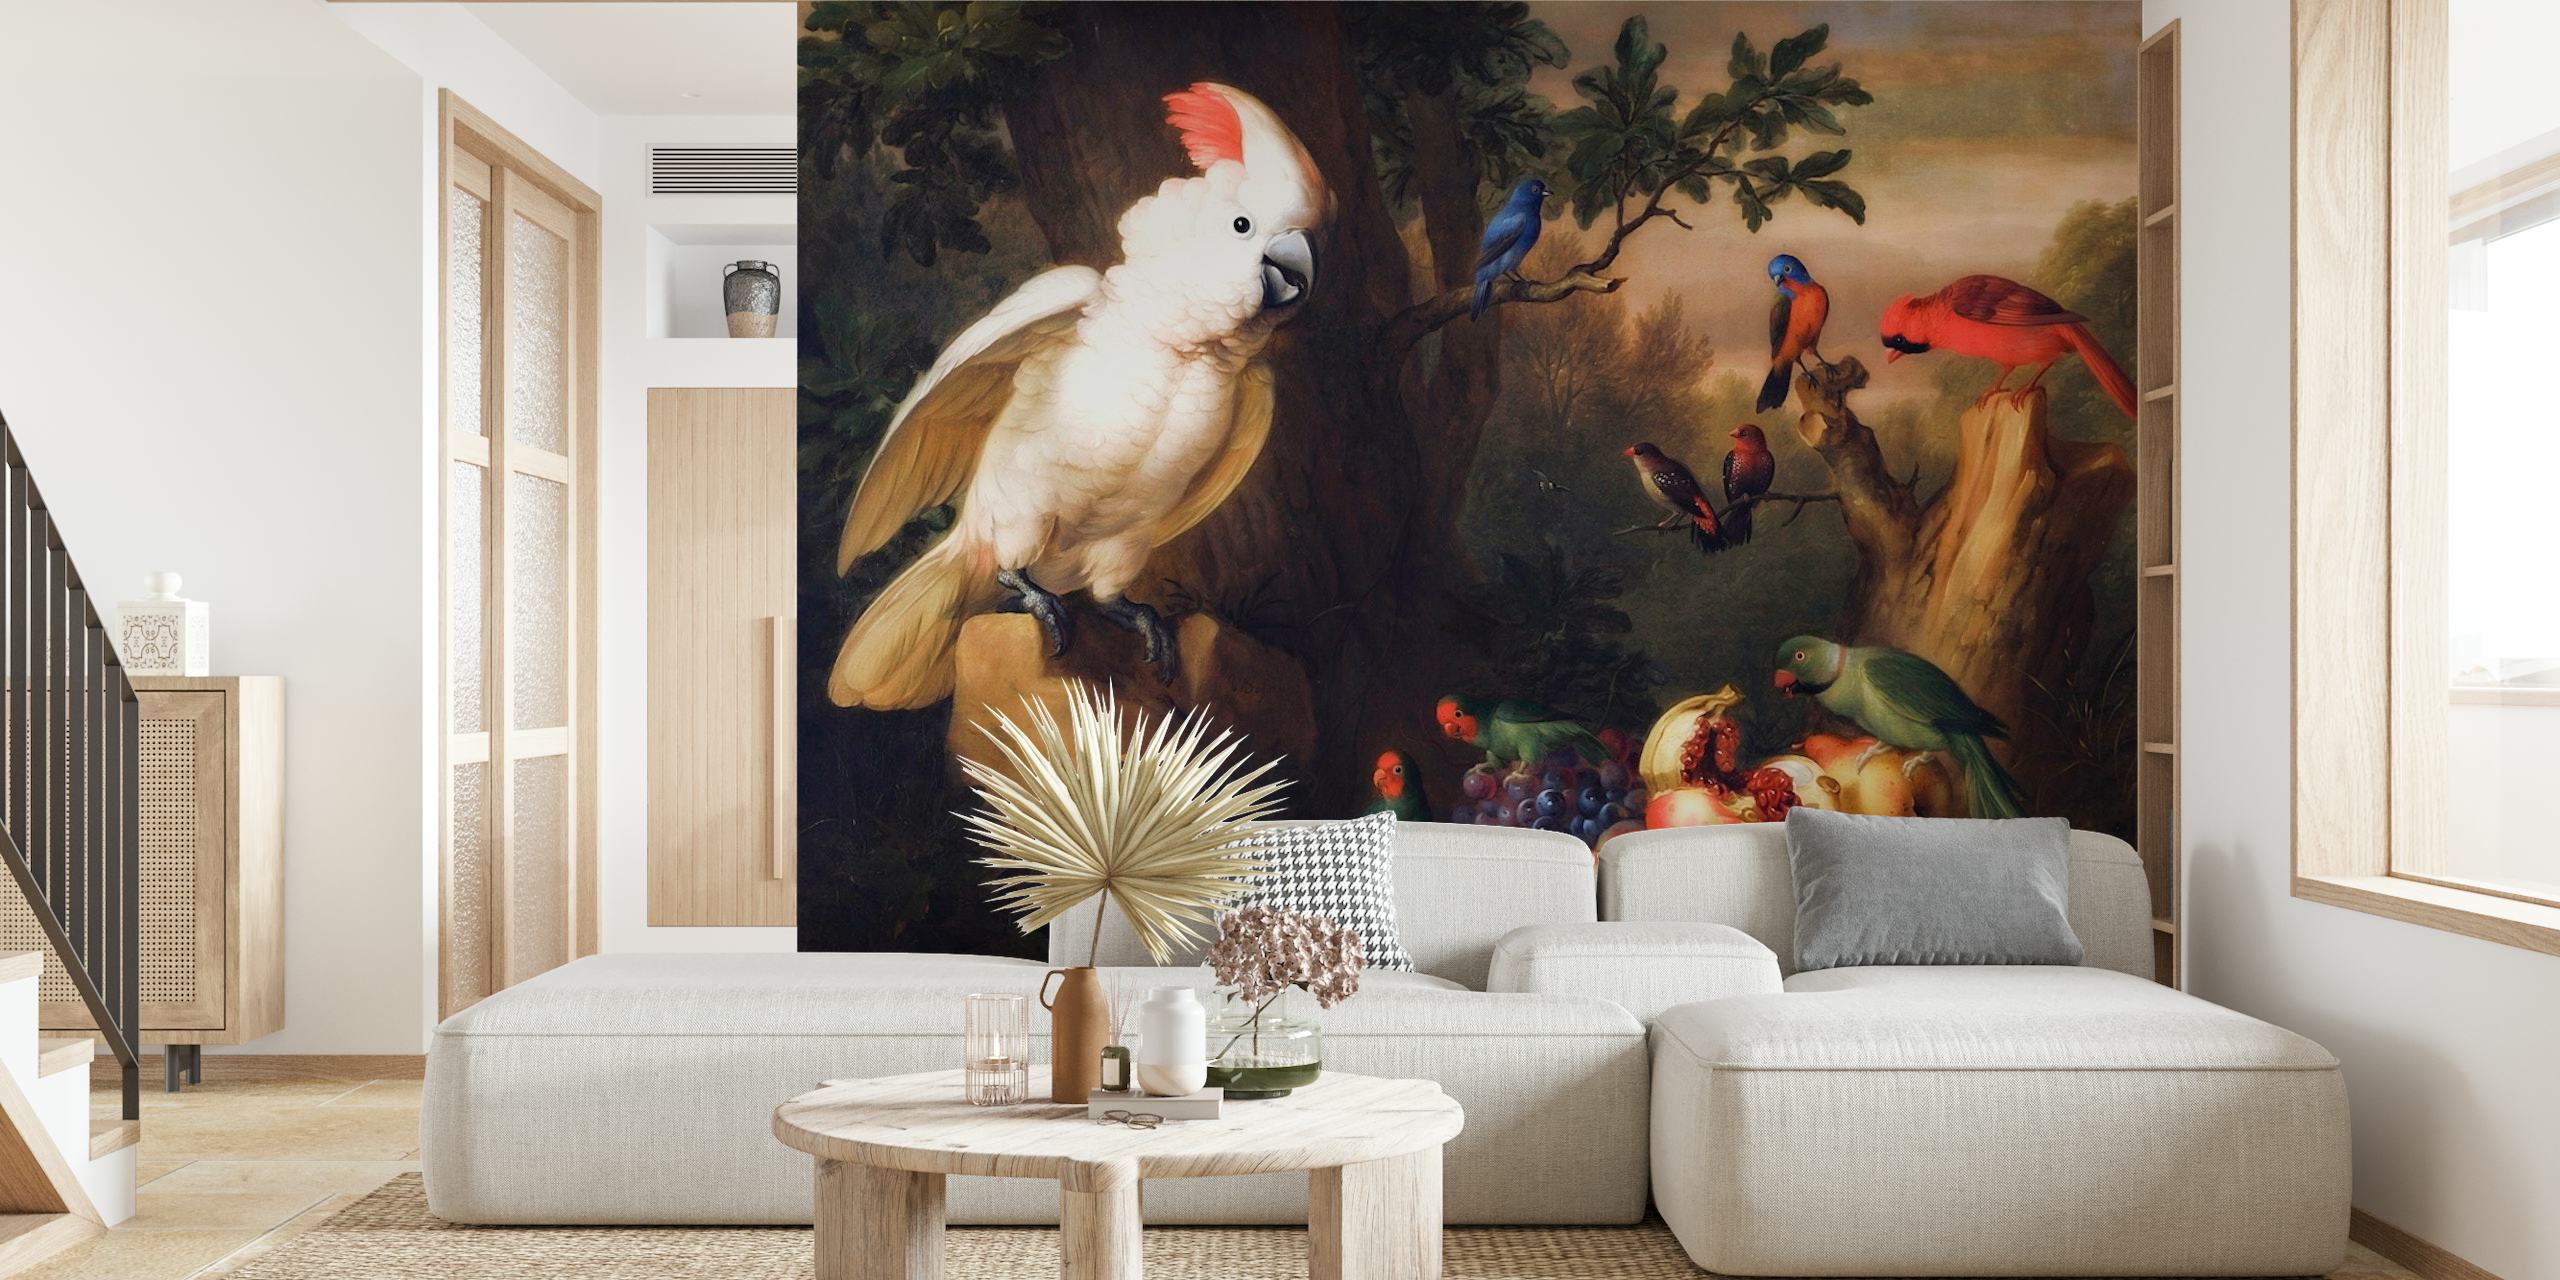 Baroque-style wall mural with vintage tropical birds and lush garden scenery